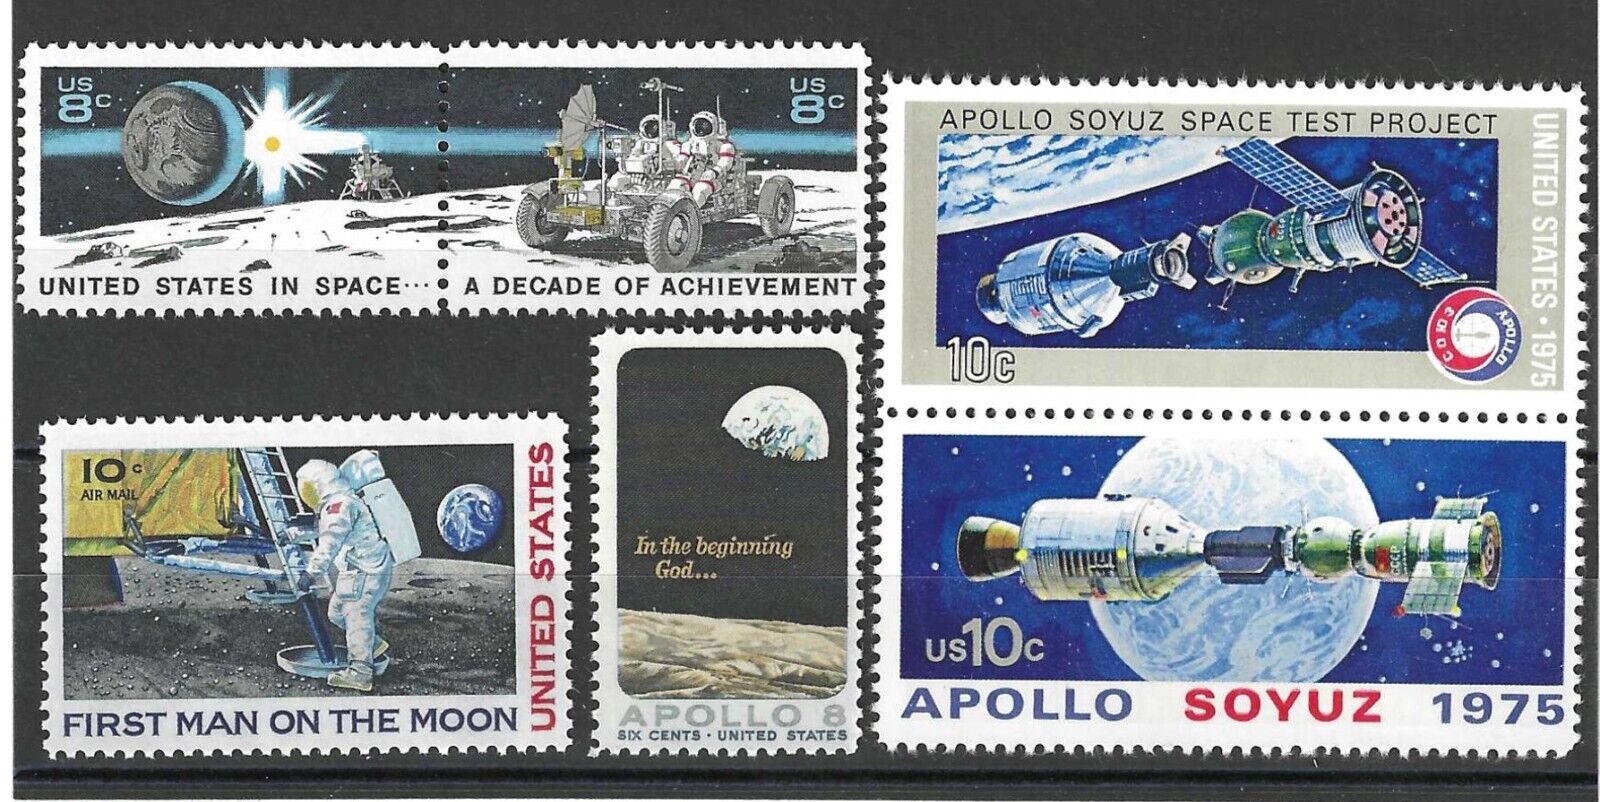 1960's-1970's APOLLO SPACE MISSIONS - SET OF 6 U.S. STAMPS - MINT CONDITION